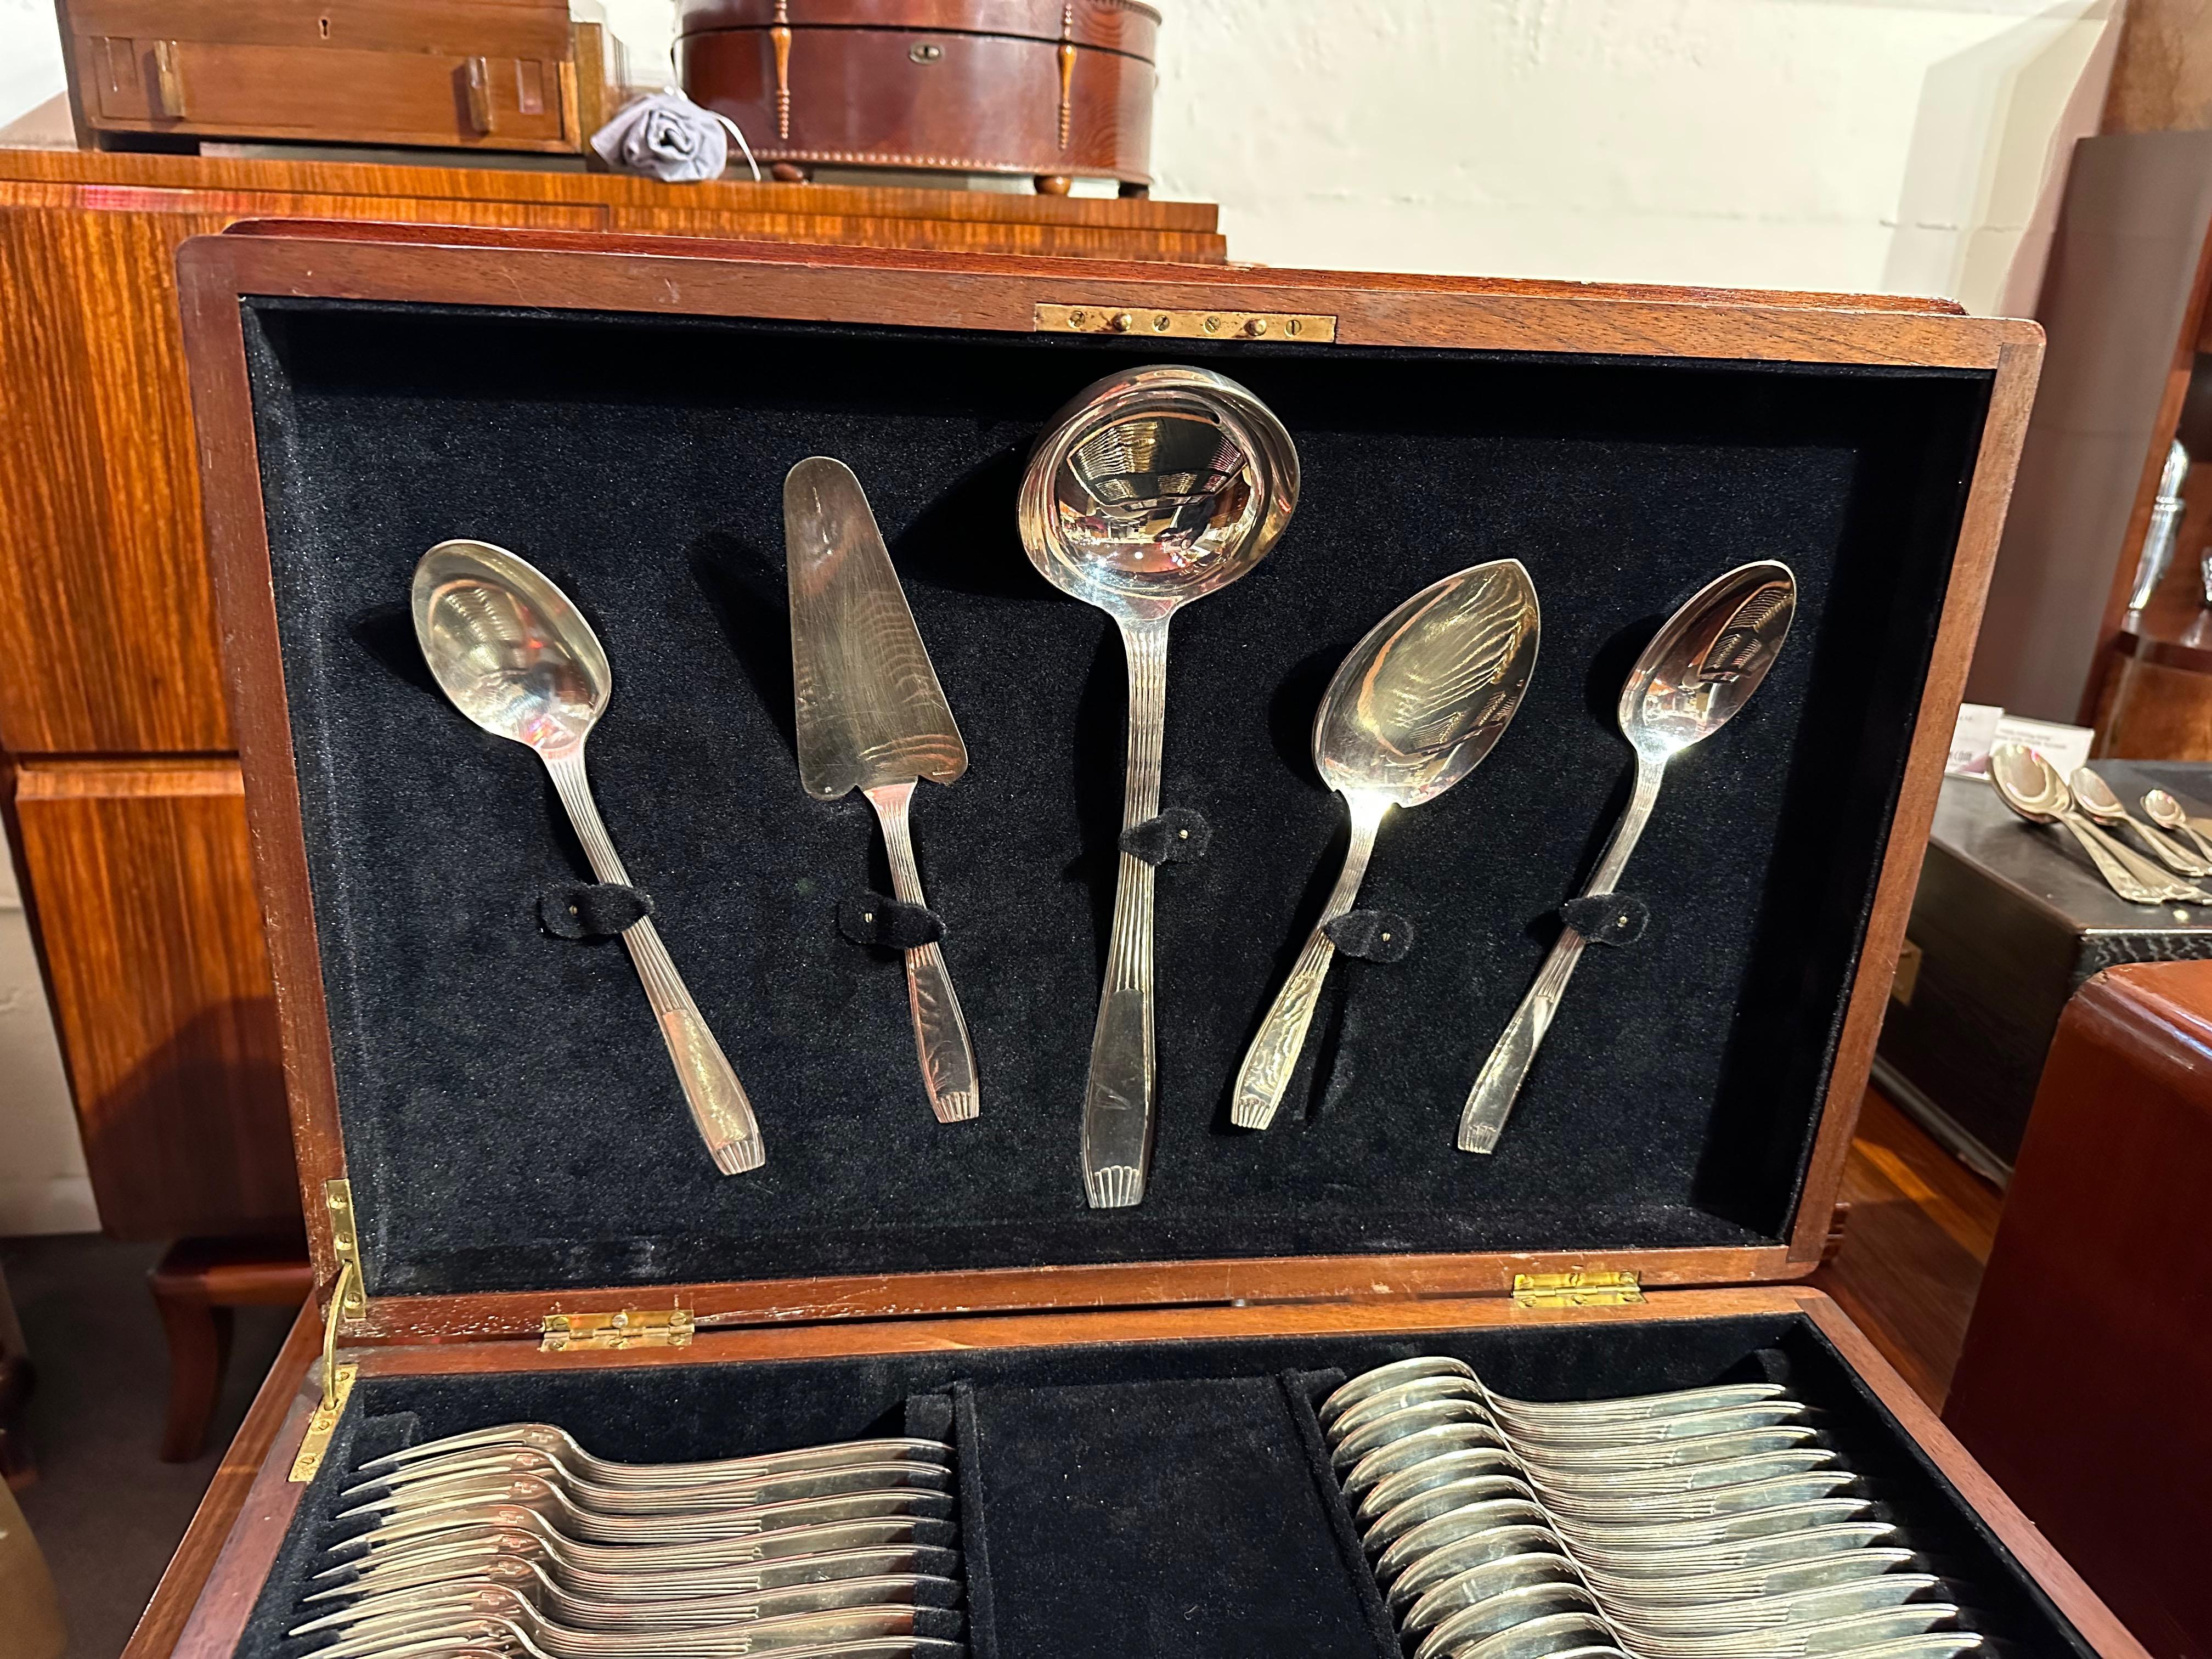 A set of  Christofle silverware in a complete service for 12 in a velvet-lined fitted chest. This is the modernist “Cirta” Pattern with 125 Pieces in all. Each piece is nestled in its own compartment with the five beautiful serving pieces displayed